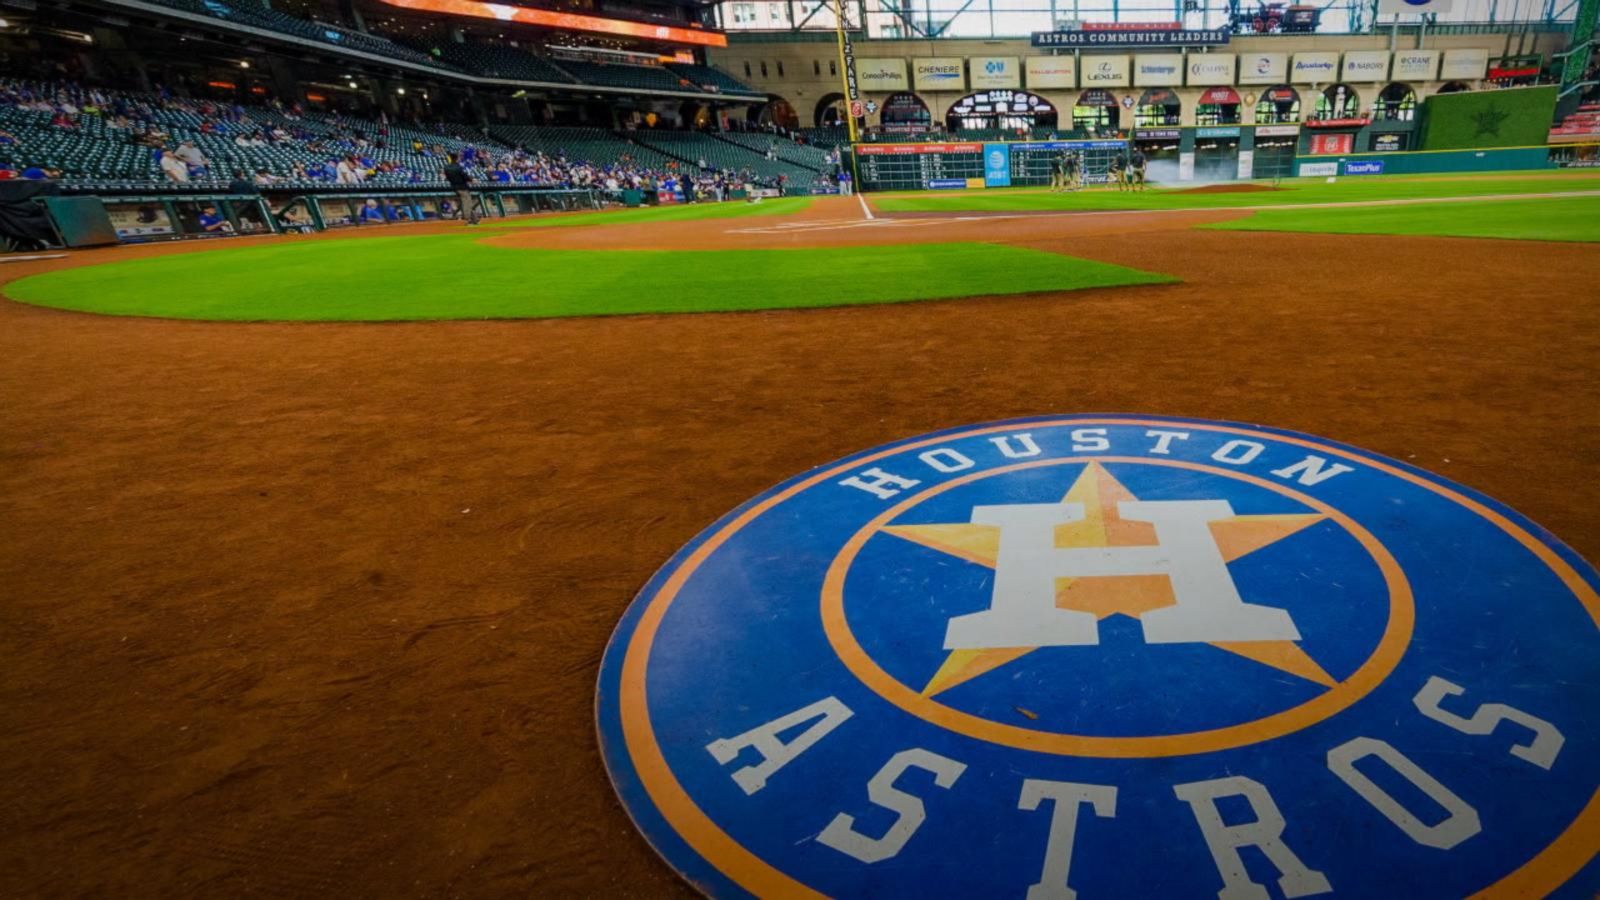 The Houston Astros' Cheating Scandal of 2017: Everything to Know